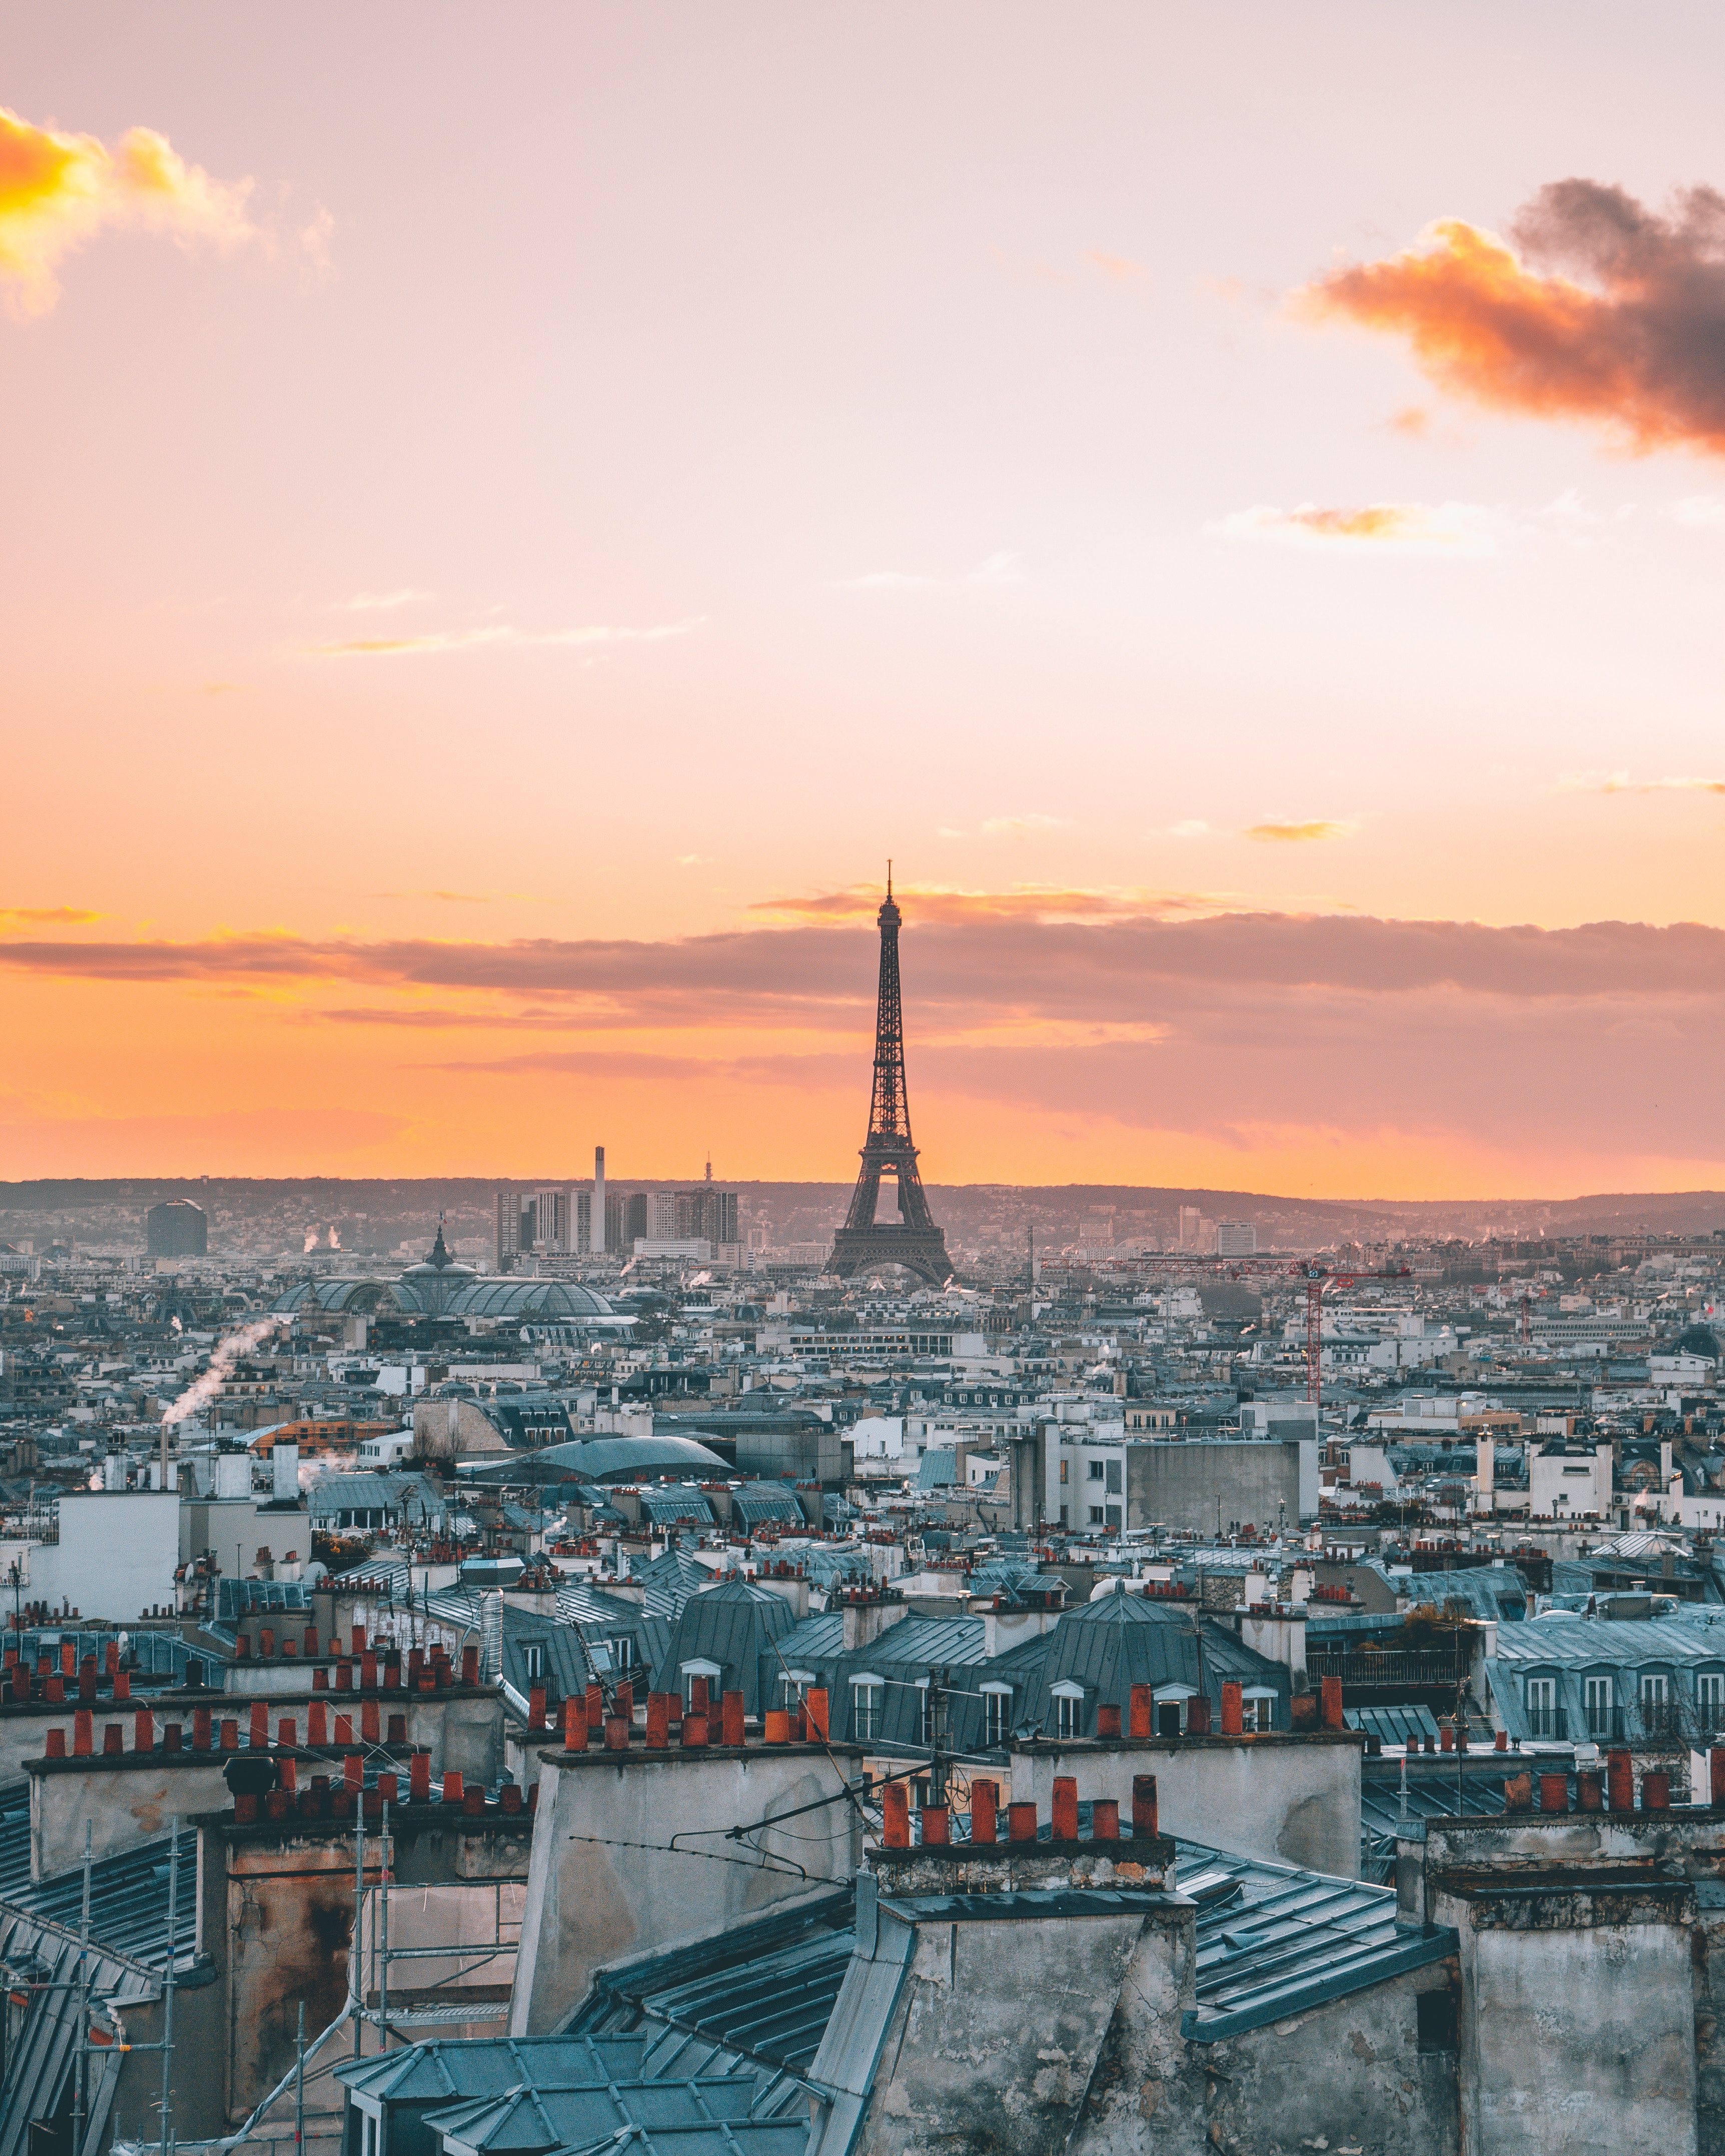 eiffel tower, cities, sunset, paris, city, view from above, france iphone wallpaper